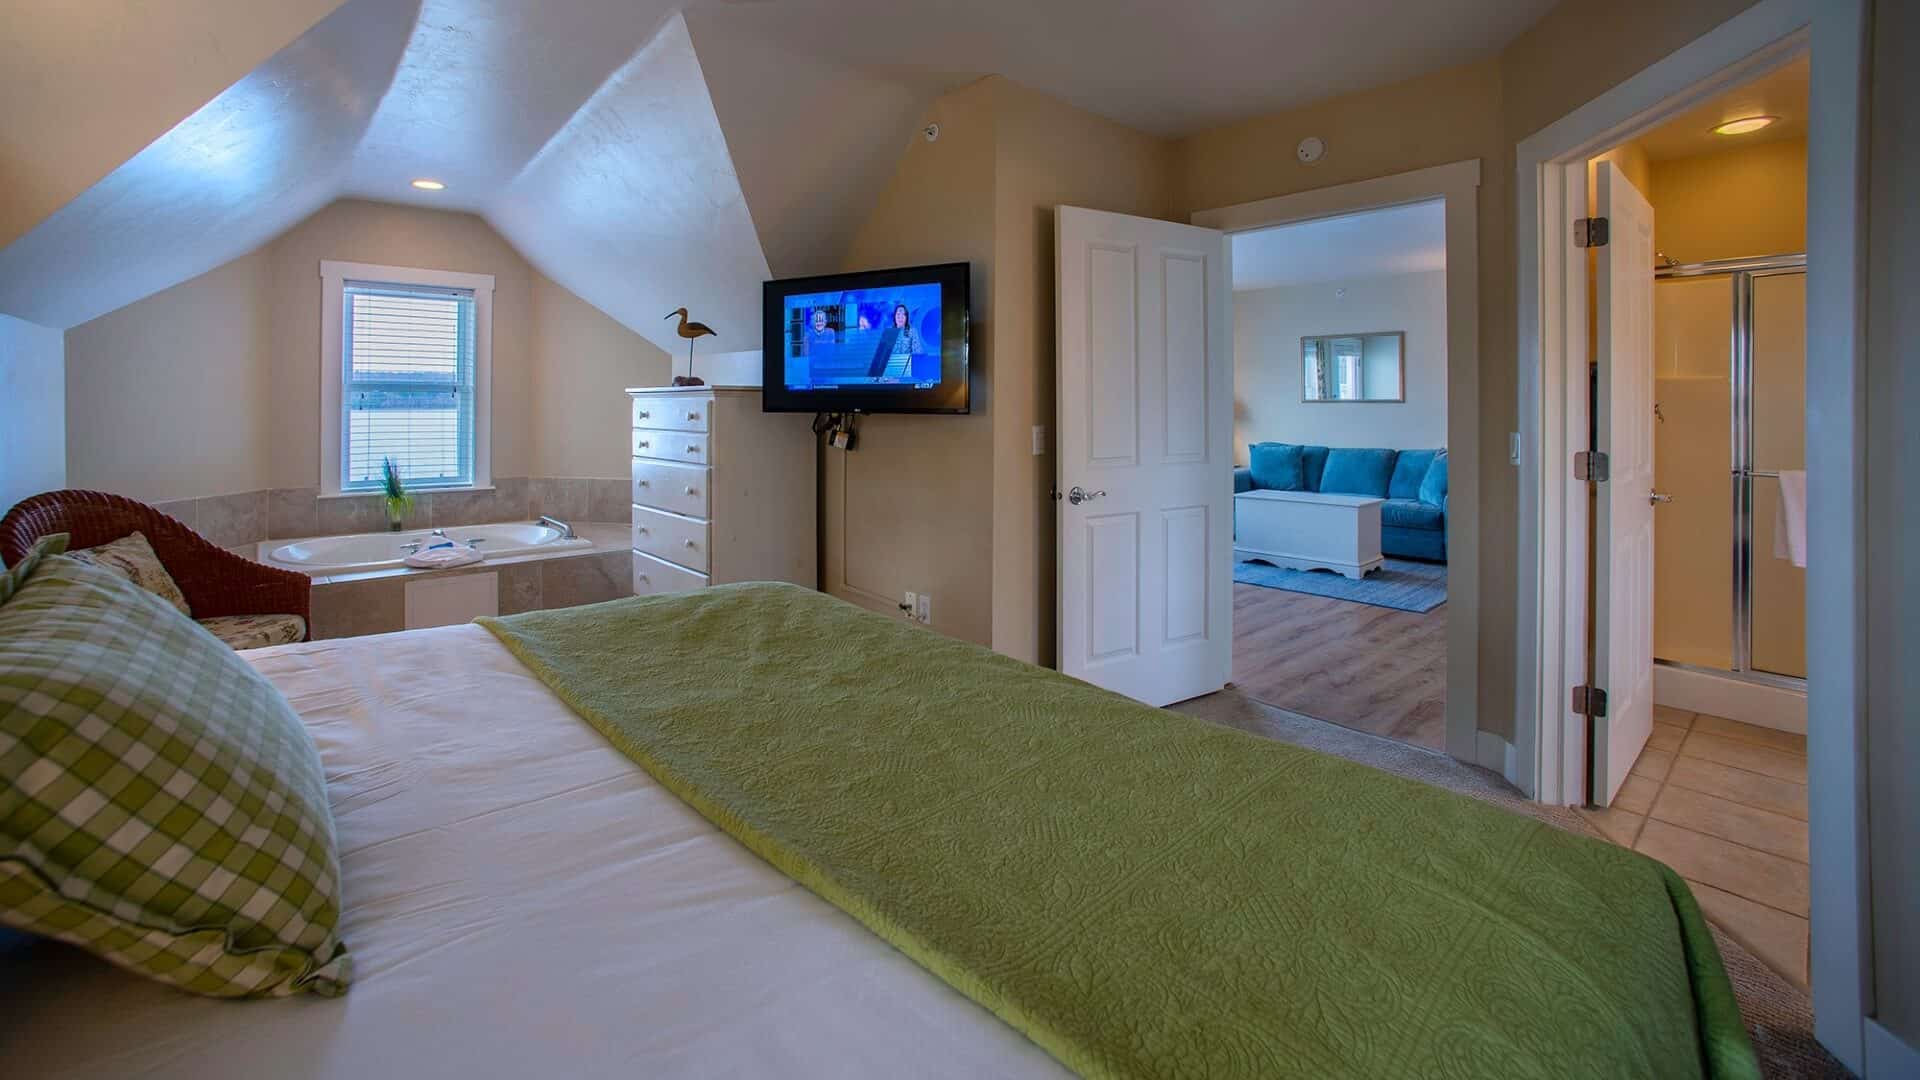 Spacious hotel suite with bedroom featuring king bed, jacuzzi tub, bathroom and doorway into a living area with a couch